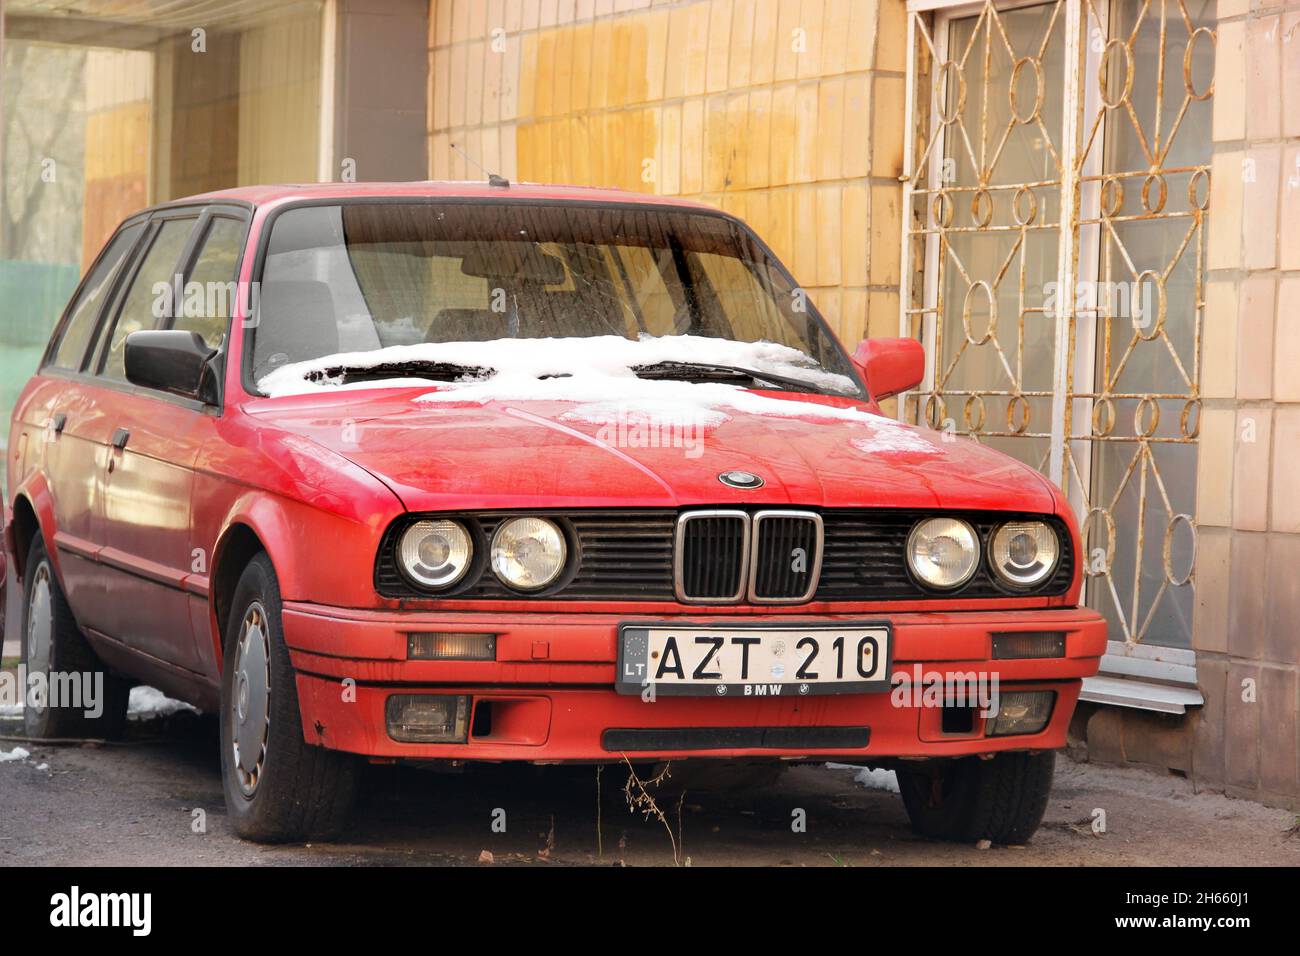 Chernihiv, Ukraine - March 31, 2020: Old red BMW car in the city Stock Photo